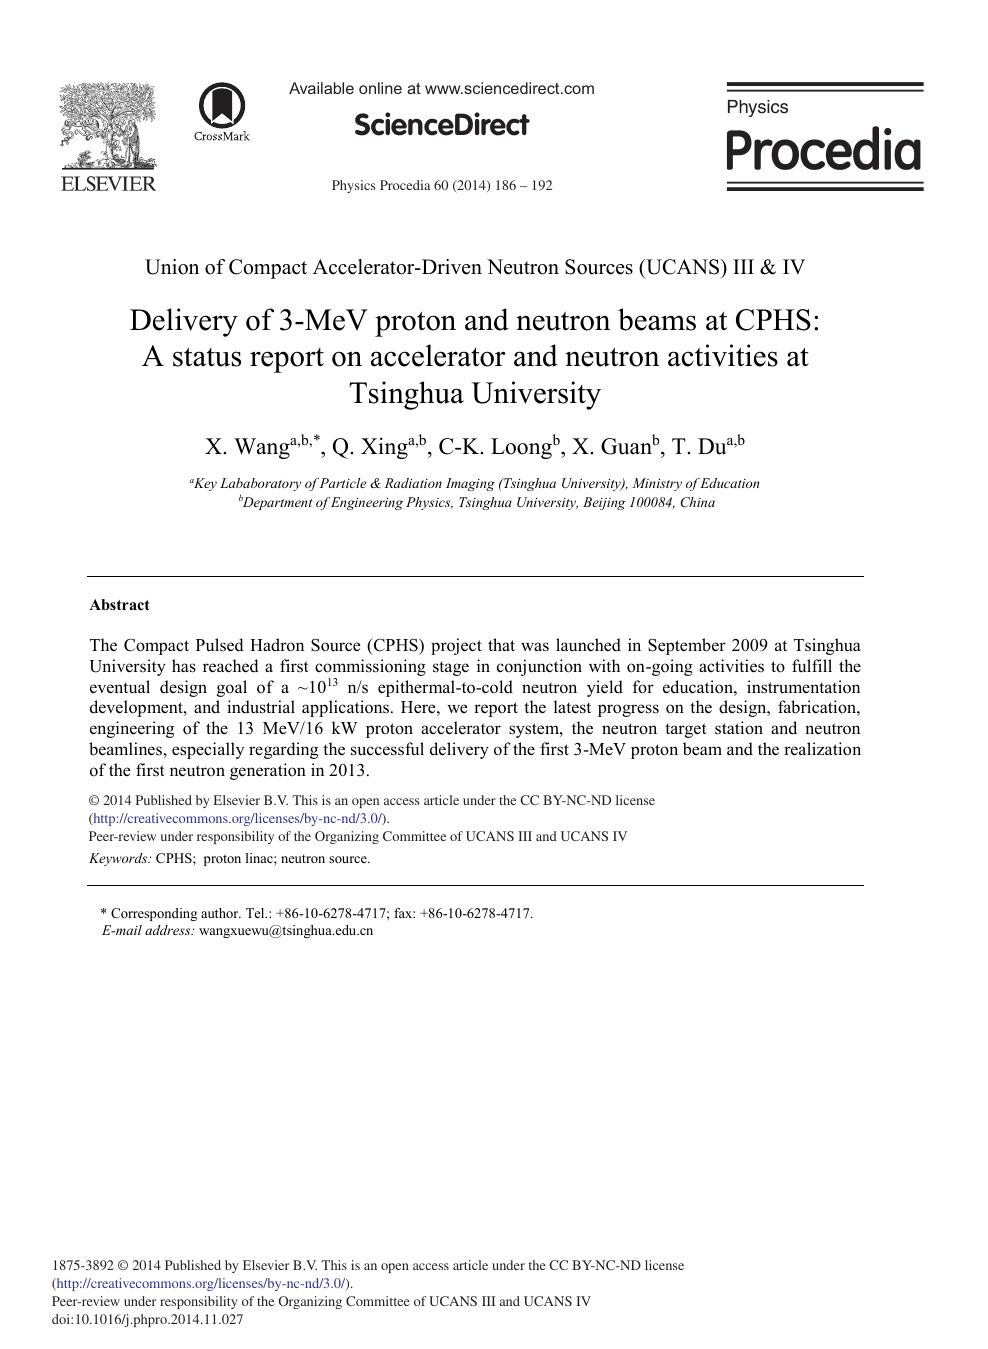 Delivery Of 3 Mev Proton And Neutron Beams At Cphs A Status Report On Accelerator And Neutron Activities At Tsinghua University Topic Of Research Paper In Materials Engineering Download Scholarly Article Pdf